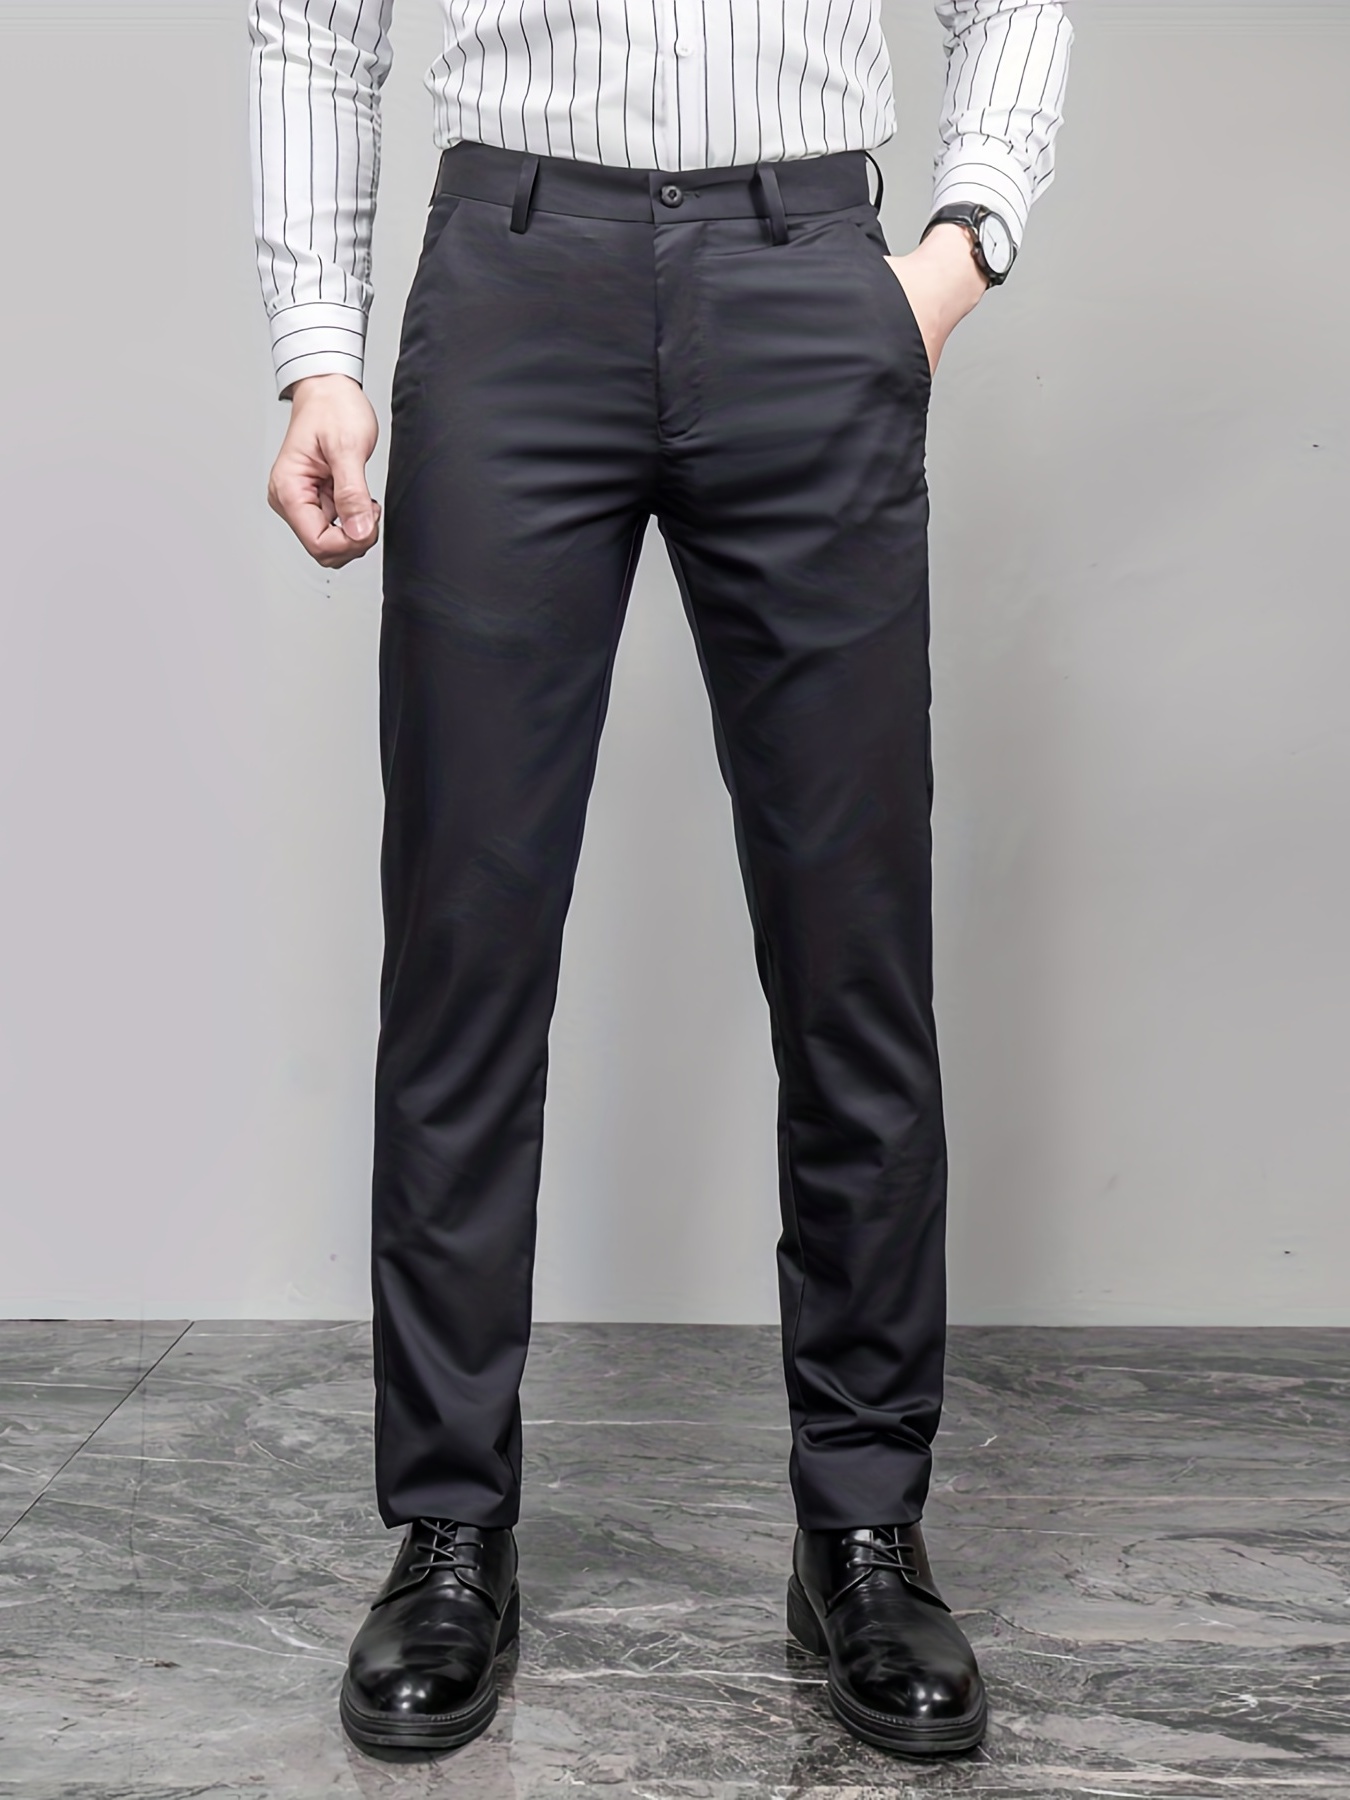 Mens Dress Pants High Waist Business Formal Trousers Casual Straight Pants  Long 